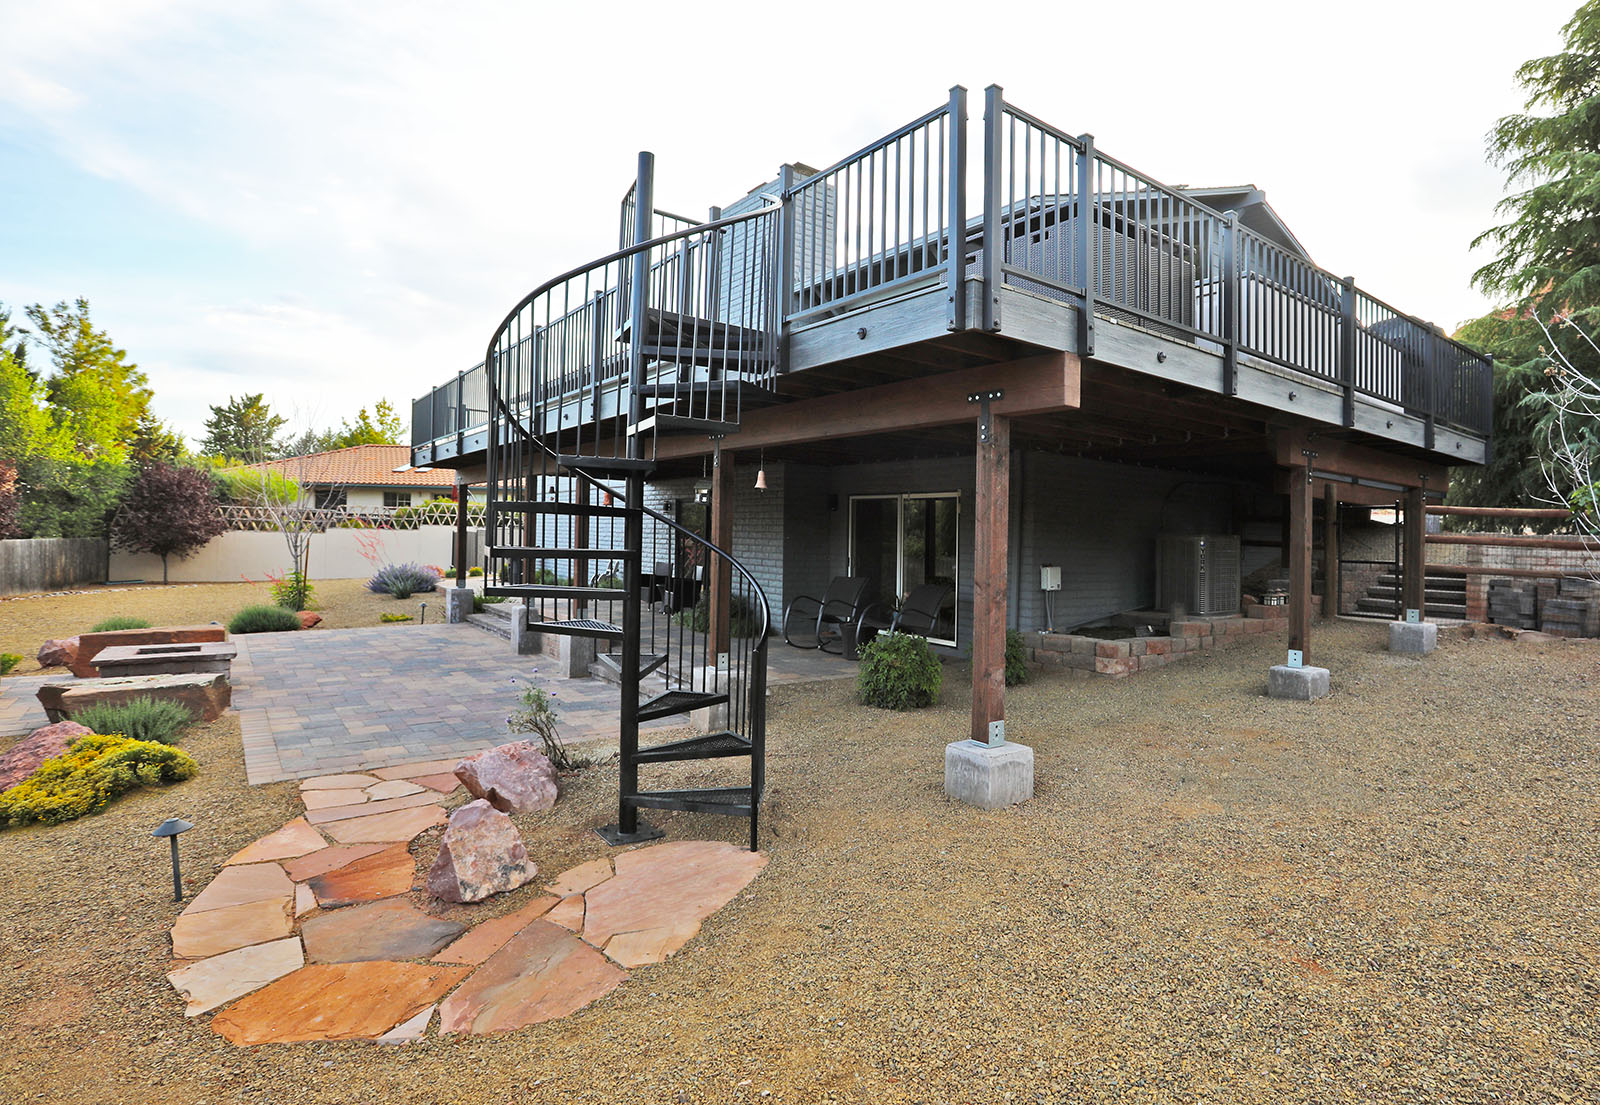 New Trex deck in Sedona with a Sprial staircase and Trex lighting